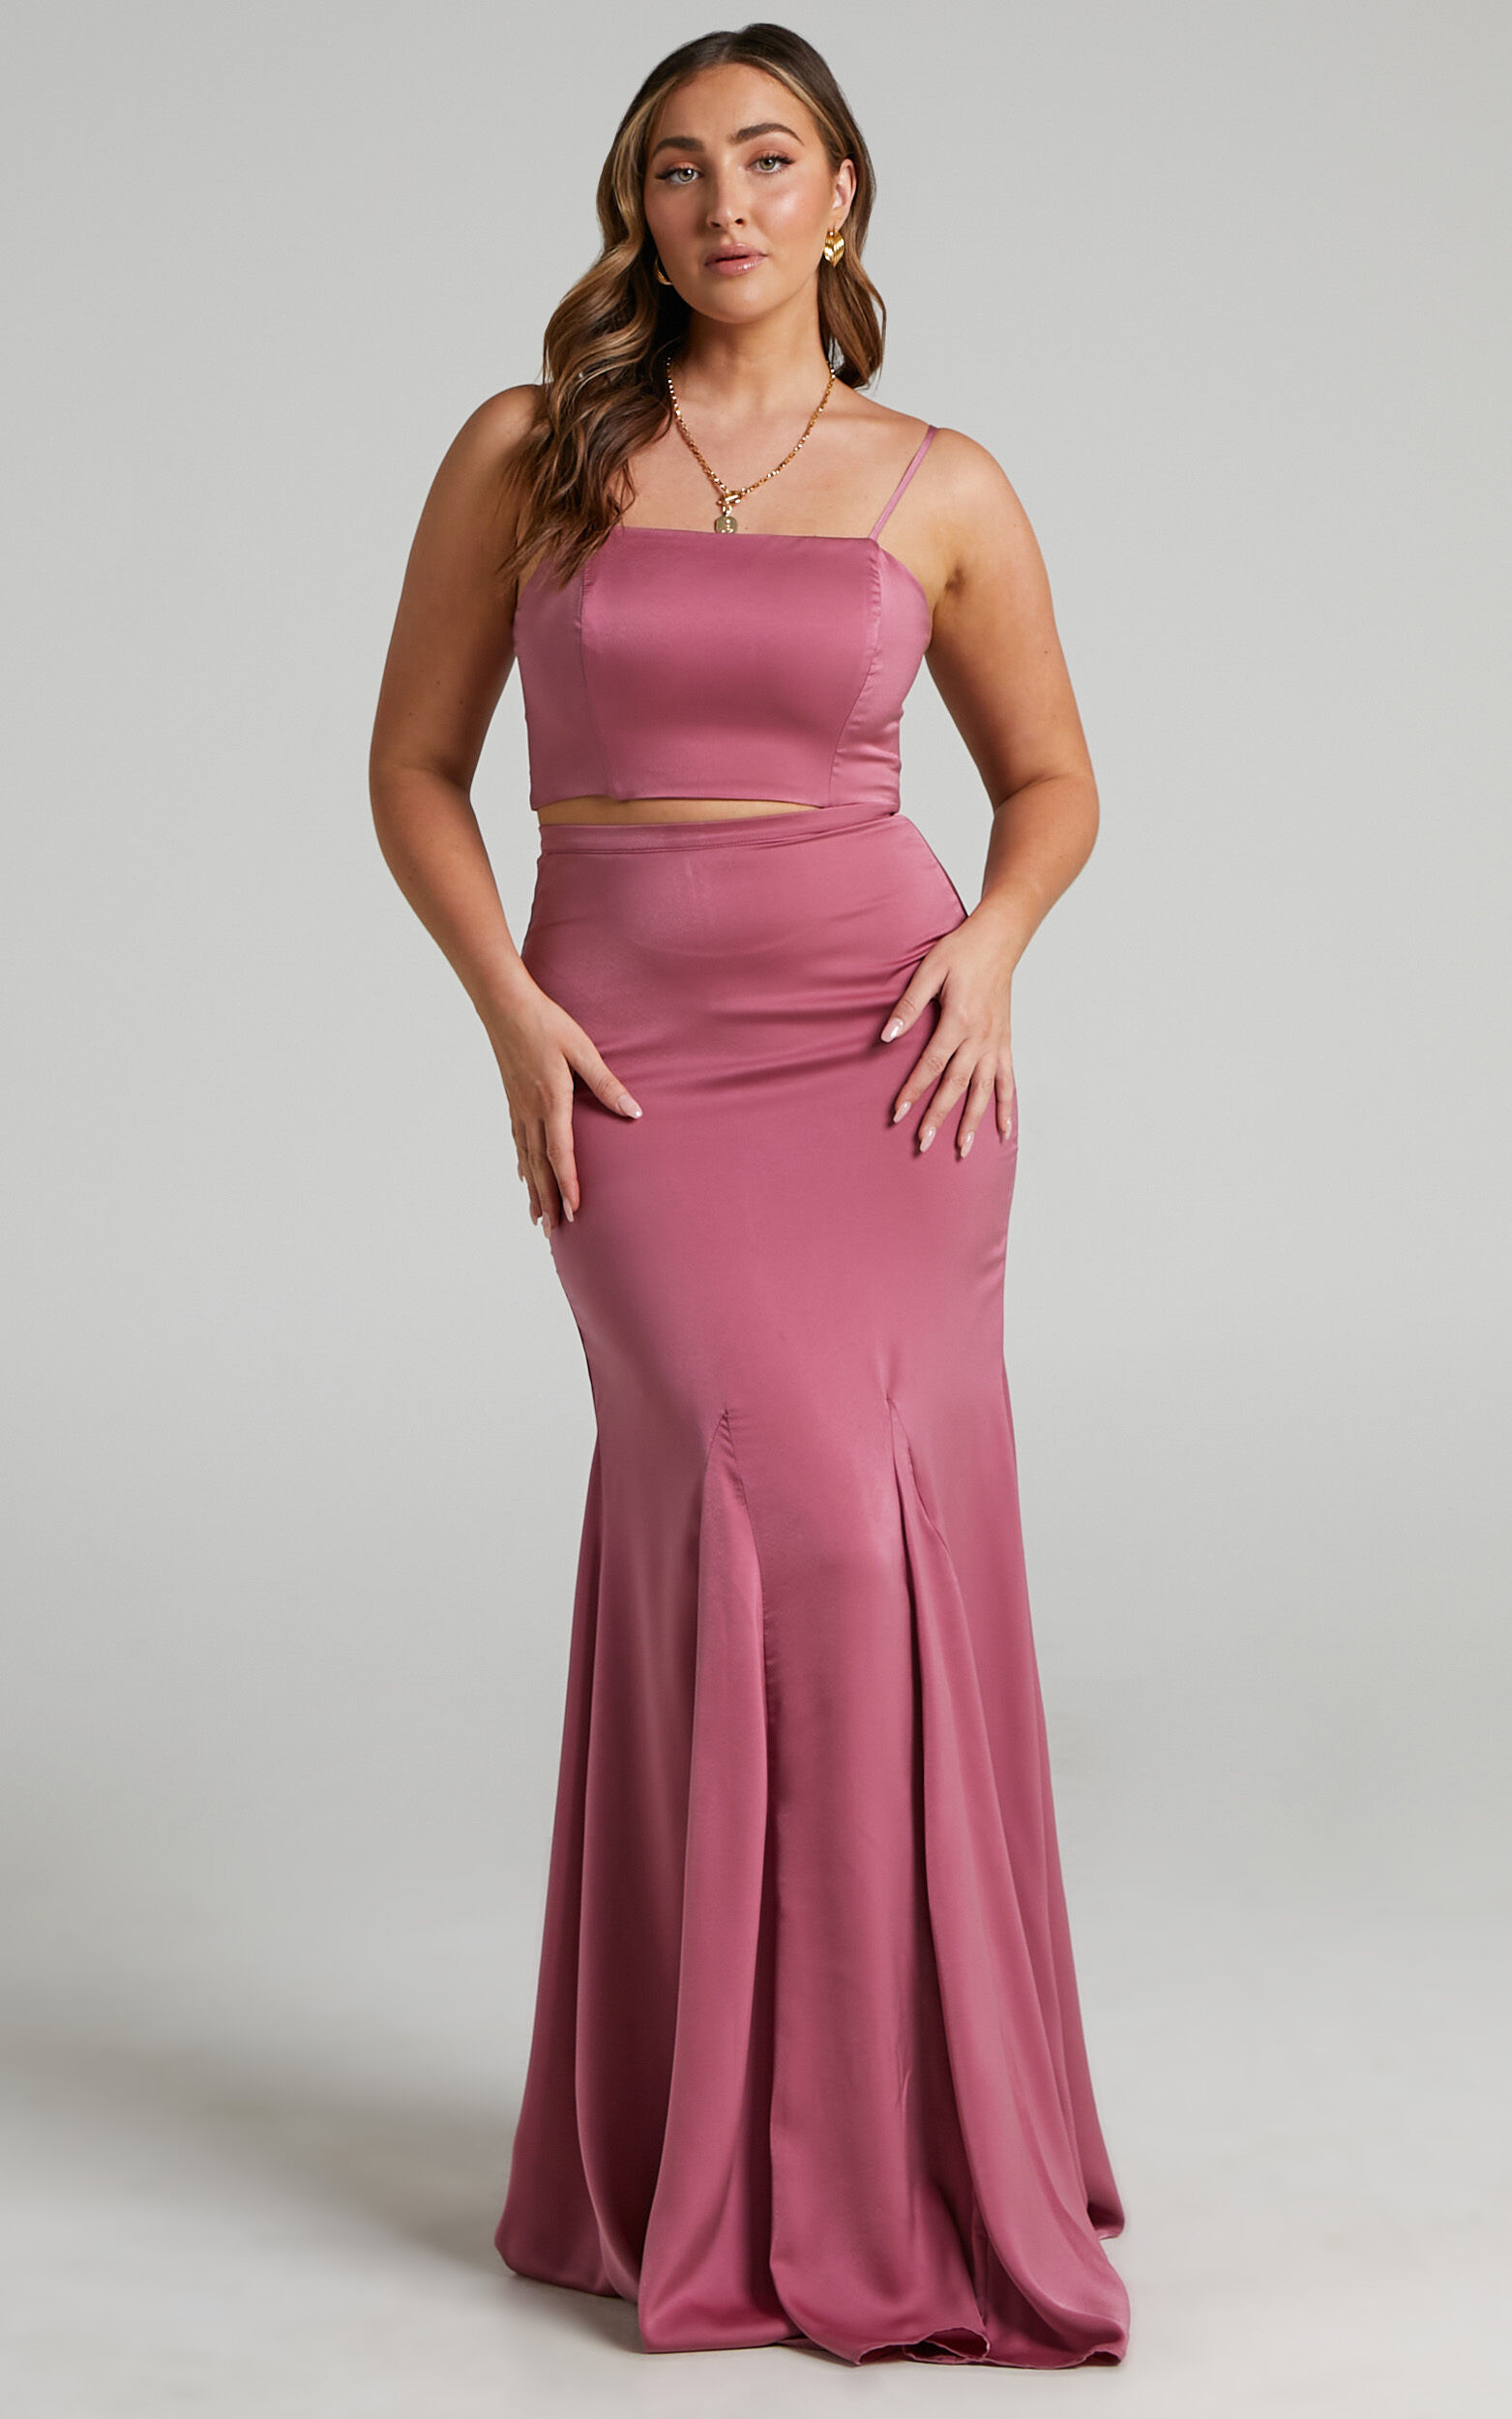 Massima Two Piece Set - Crop Top and Mermaid Maxi Skirt Set in Dusty Rose - 06, PNK1